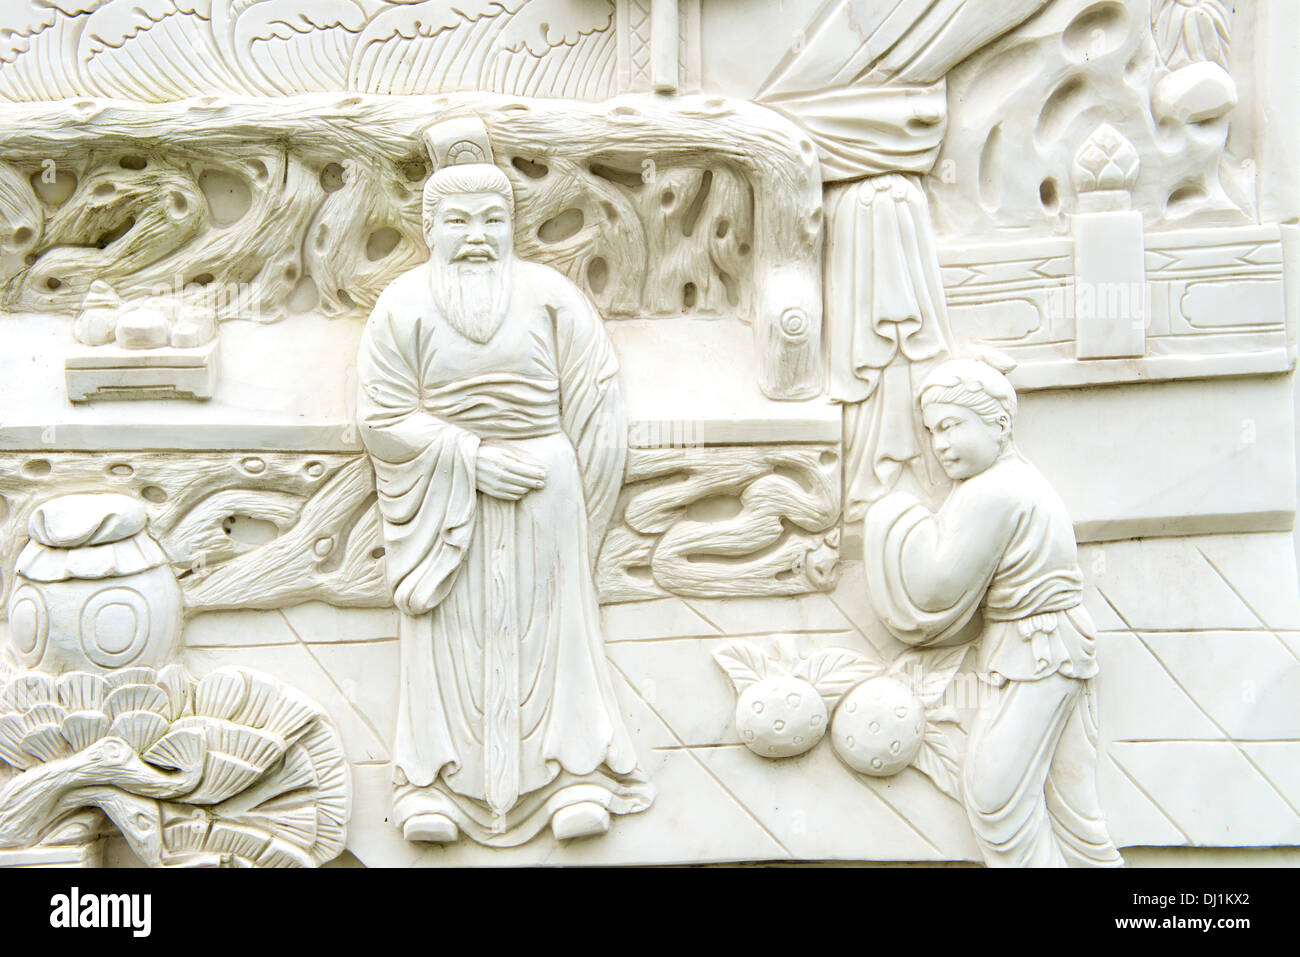 Chinese scholars carved on Chinese classical sculptures Stock Photo